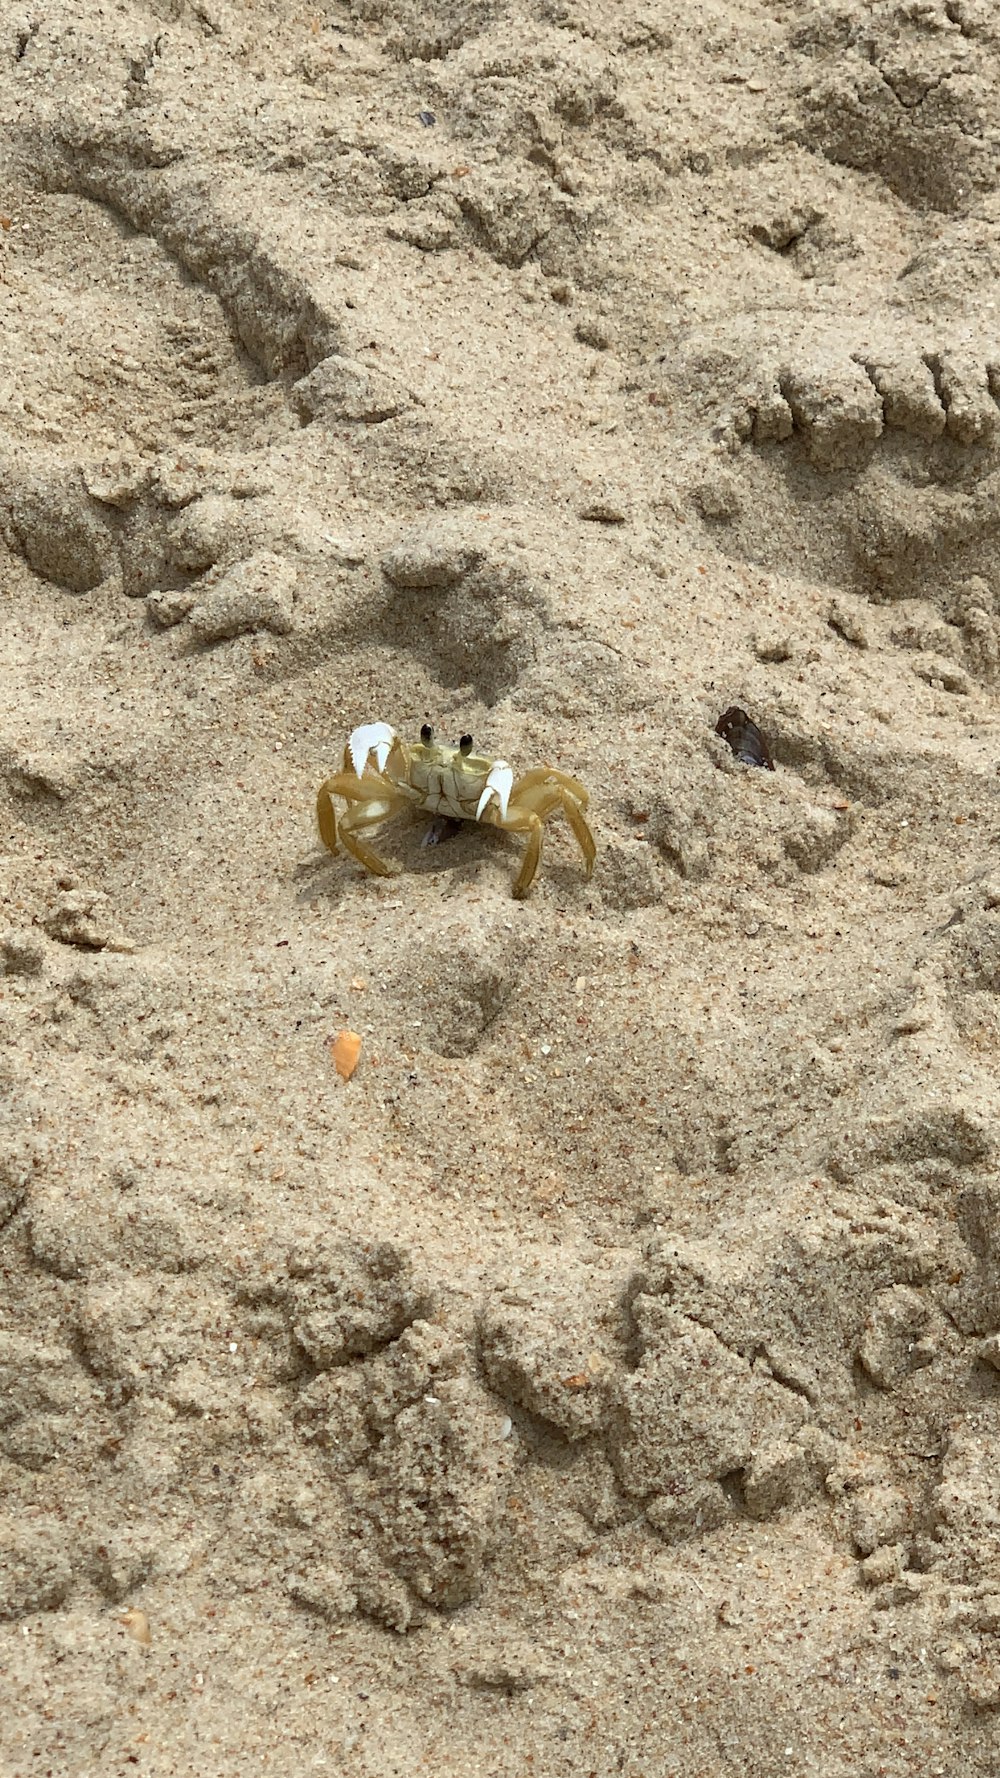 white and yellow robot on brown sand during daytime